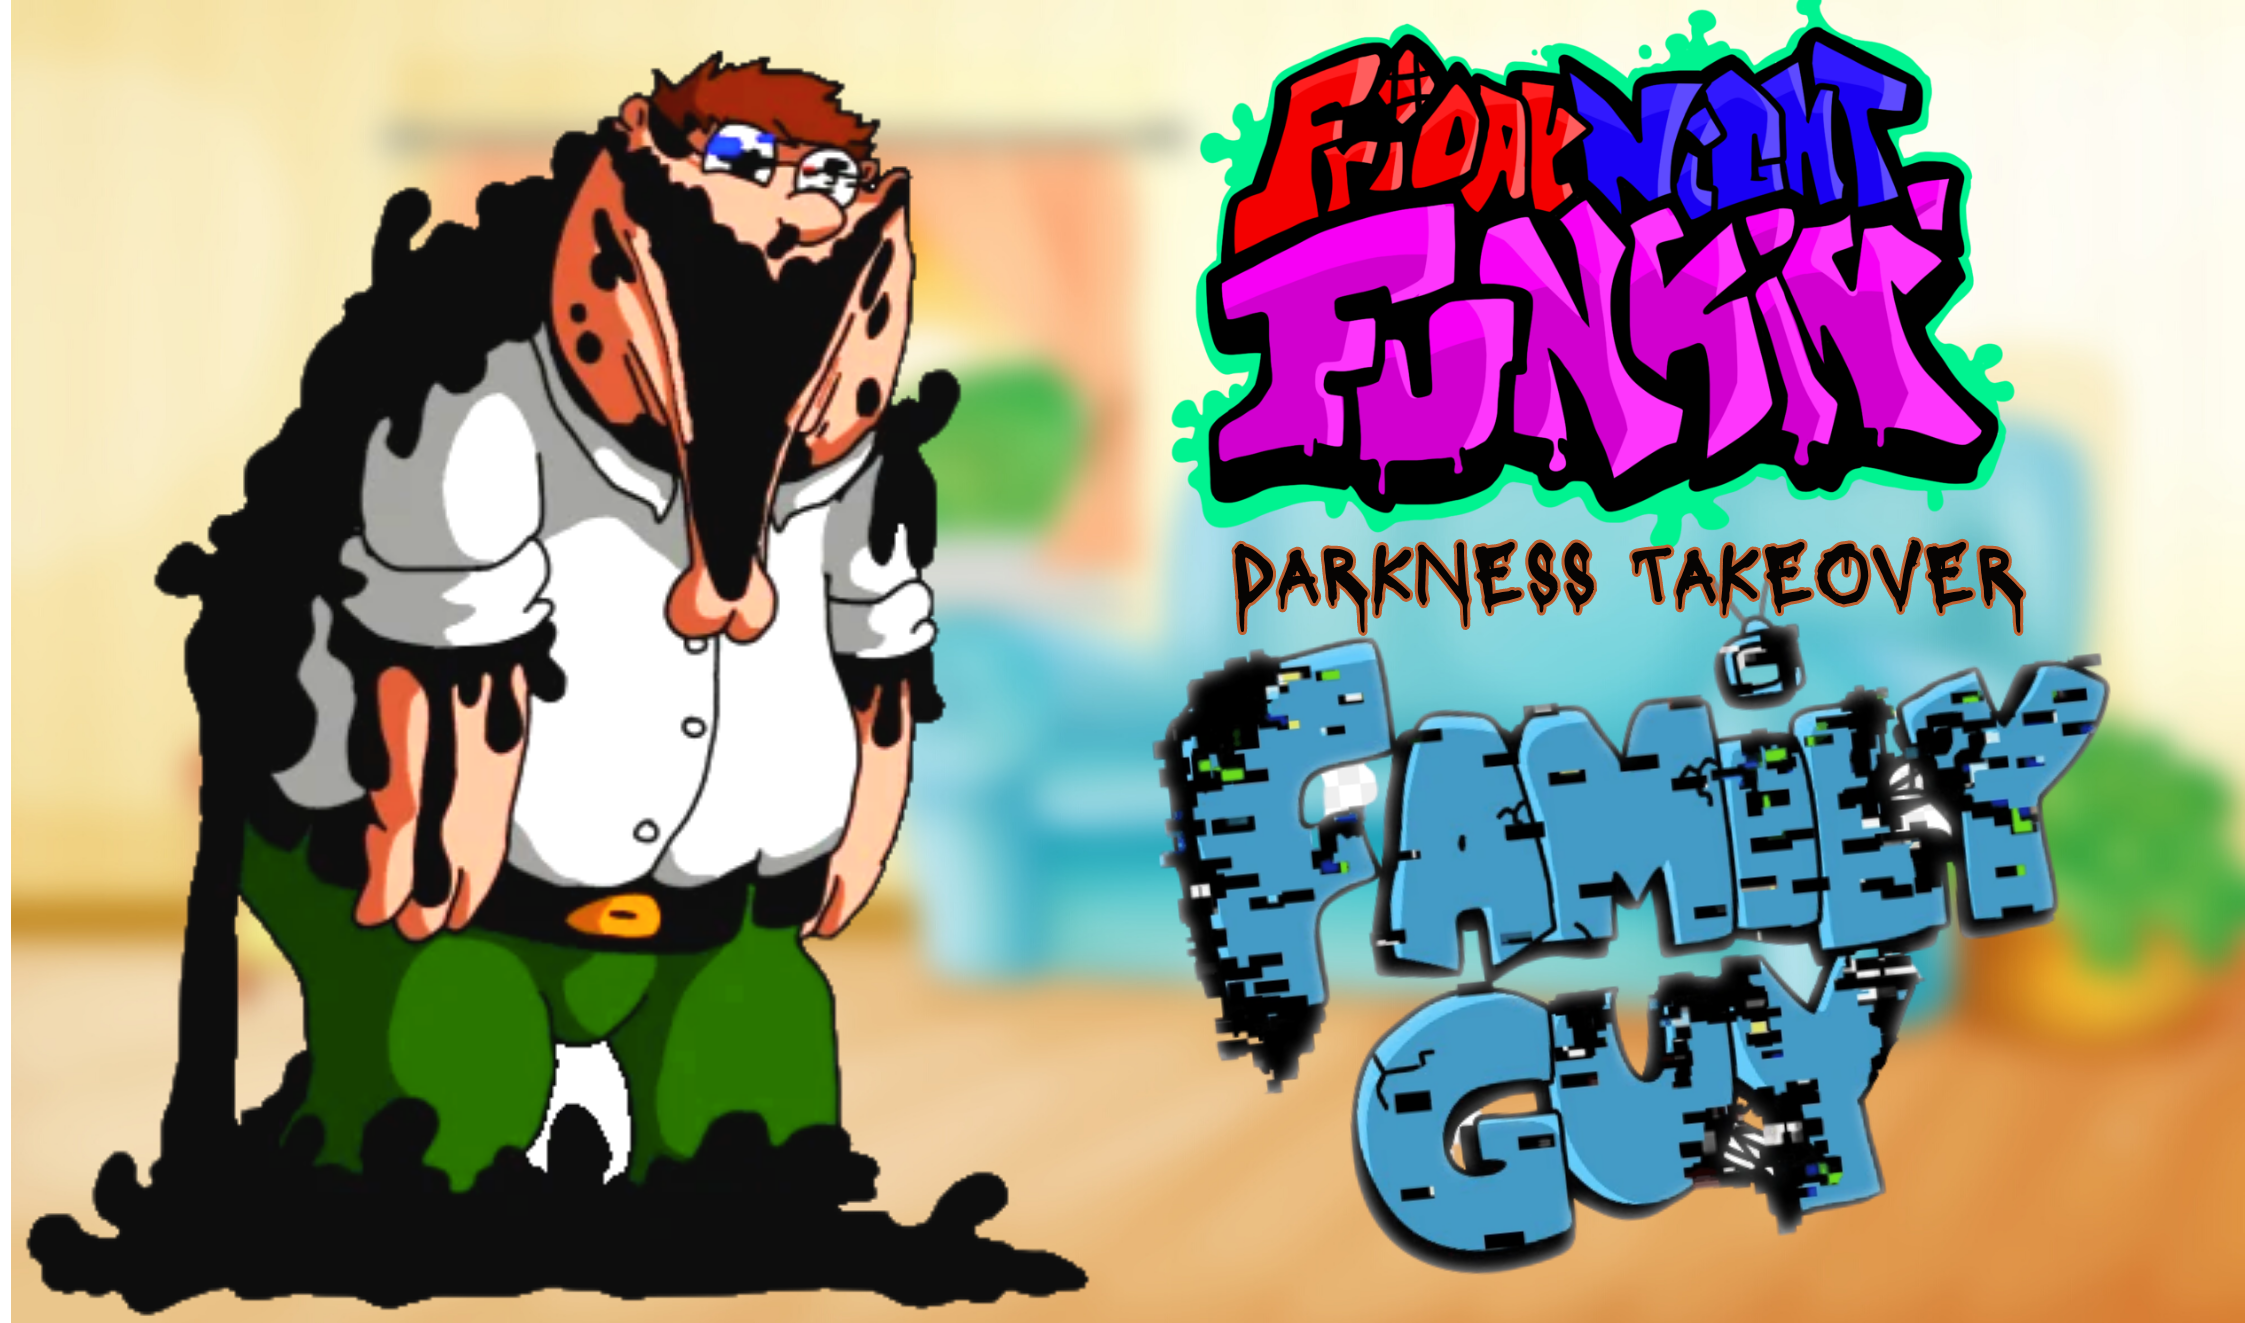 FNF: Darkness Takeover vs Pibby Family Guy Mod - Play Online